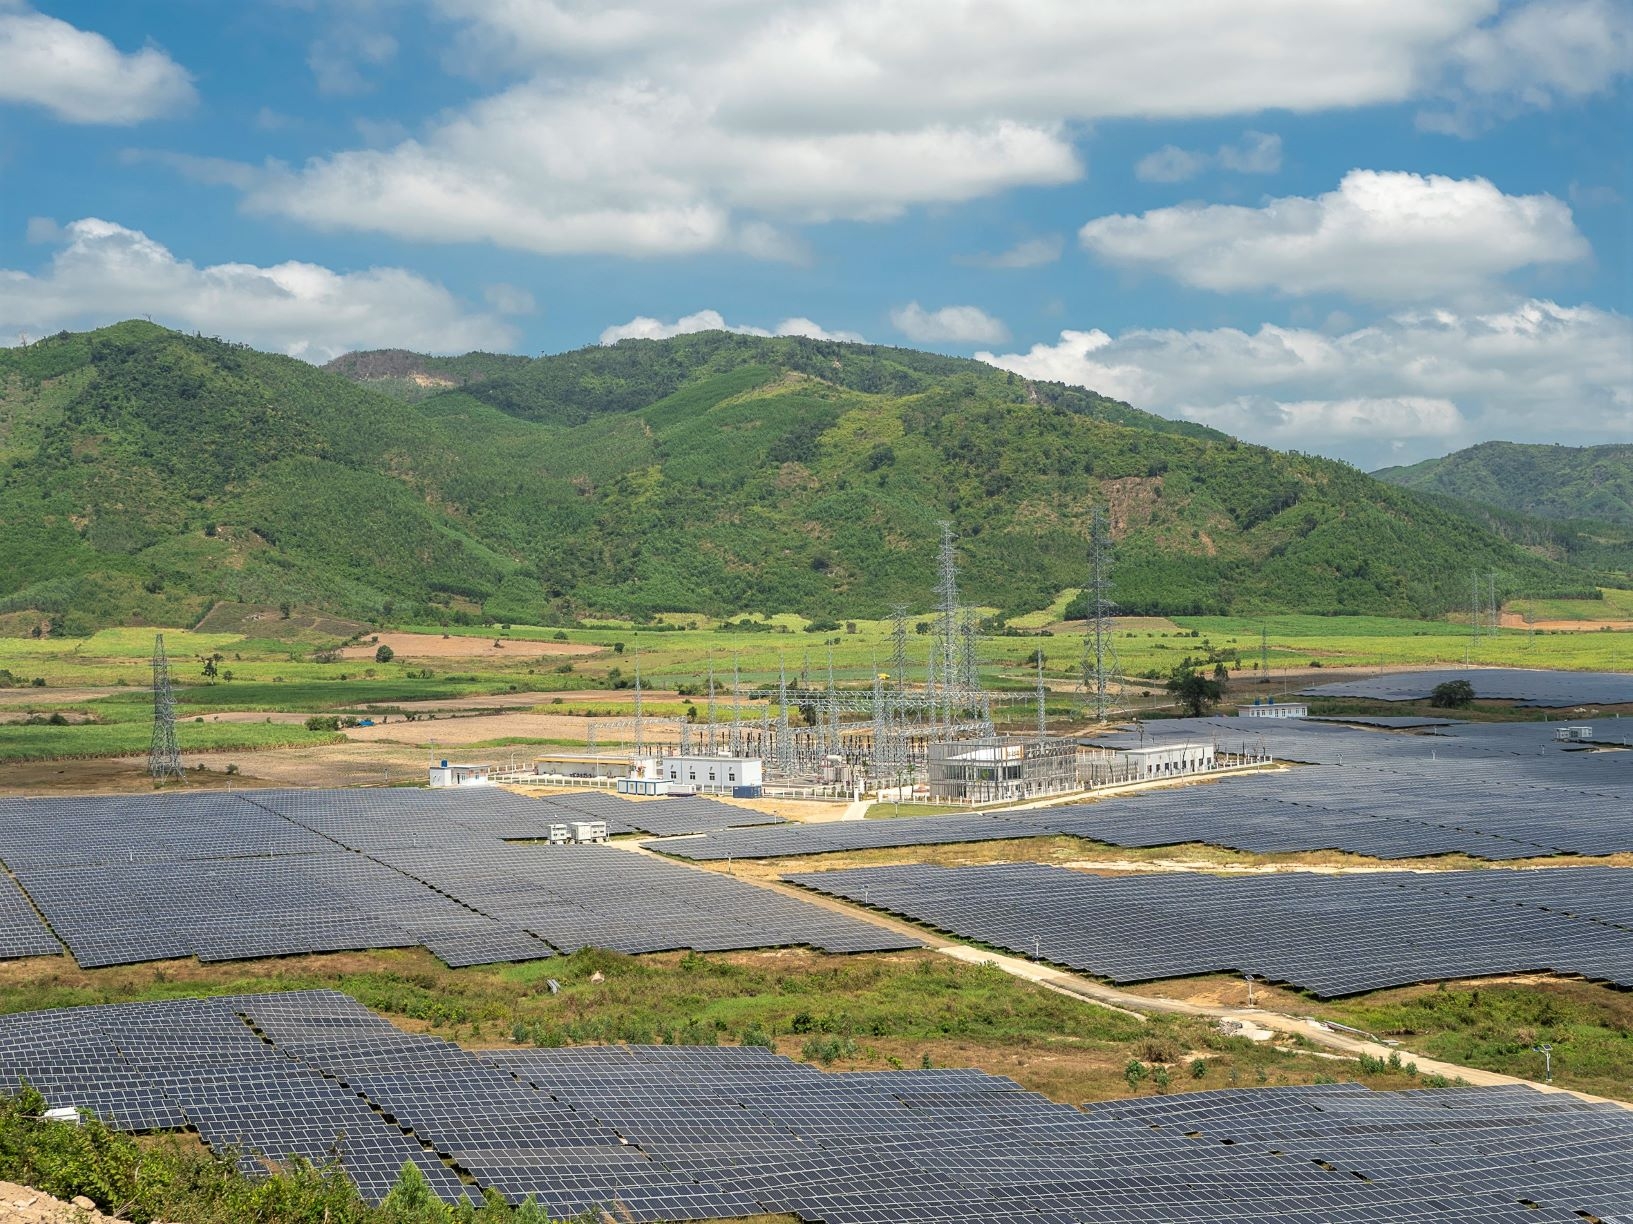 JICA-funded “LEAP” fund finances one of the largest solar power plants in Vietnam